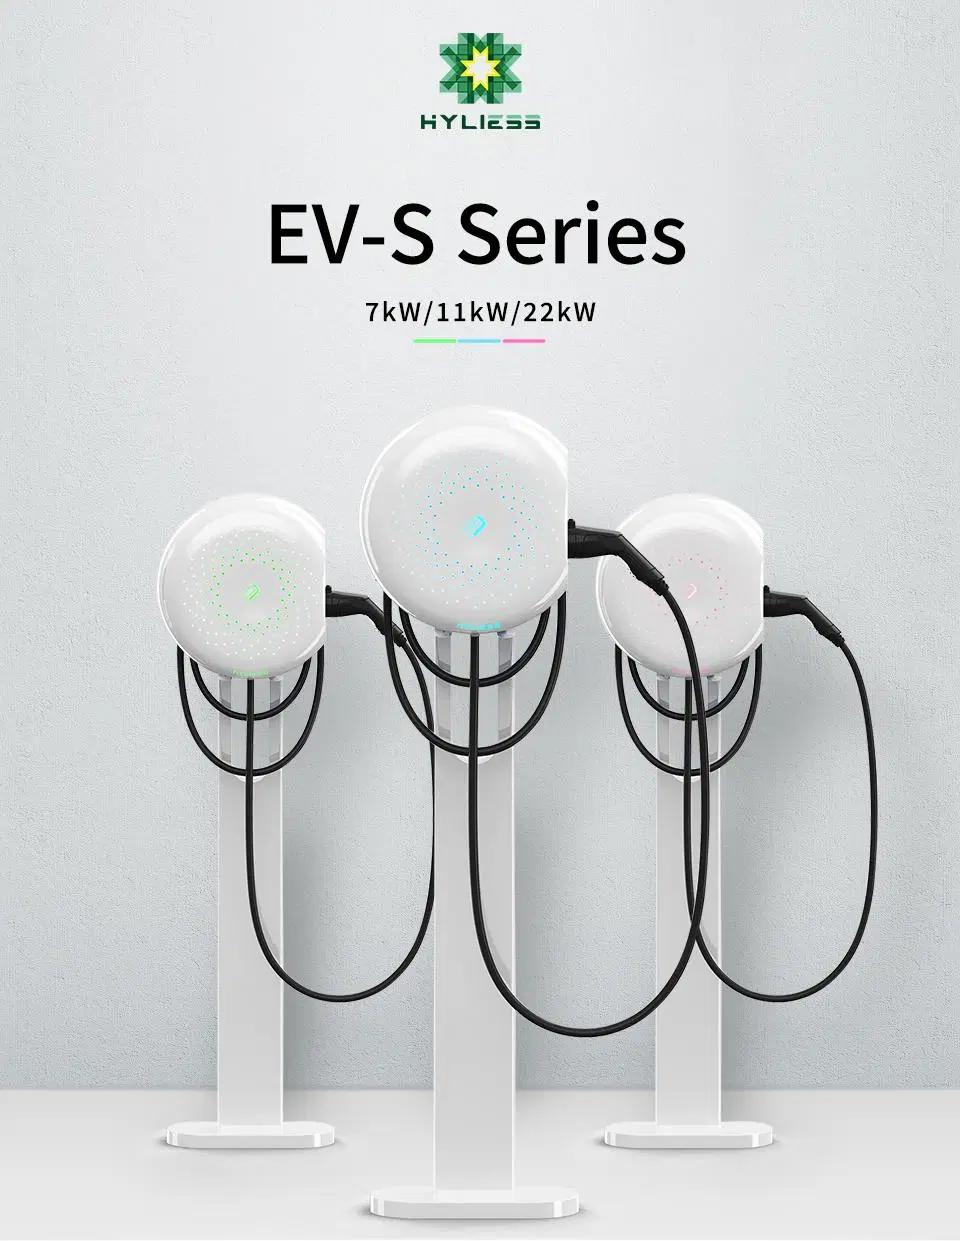 Hyliess EV-S Manufacturers OEM ODM Waterproof Level 2 Mobile AC Electric Car Charging 22kw 32A Portable EV Charger